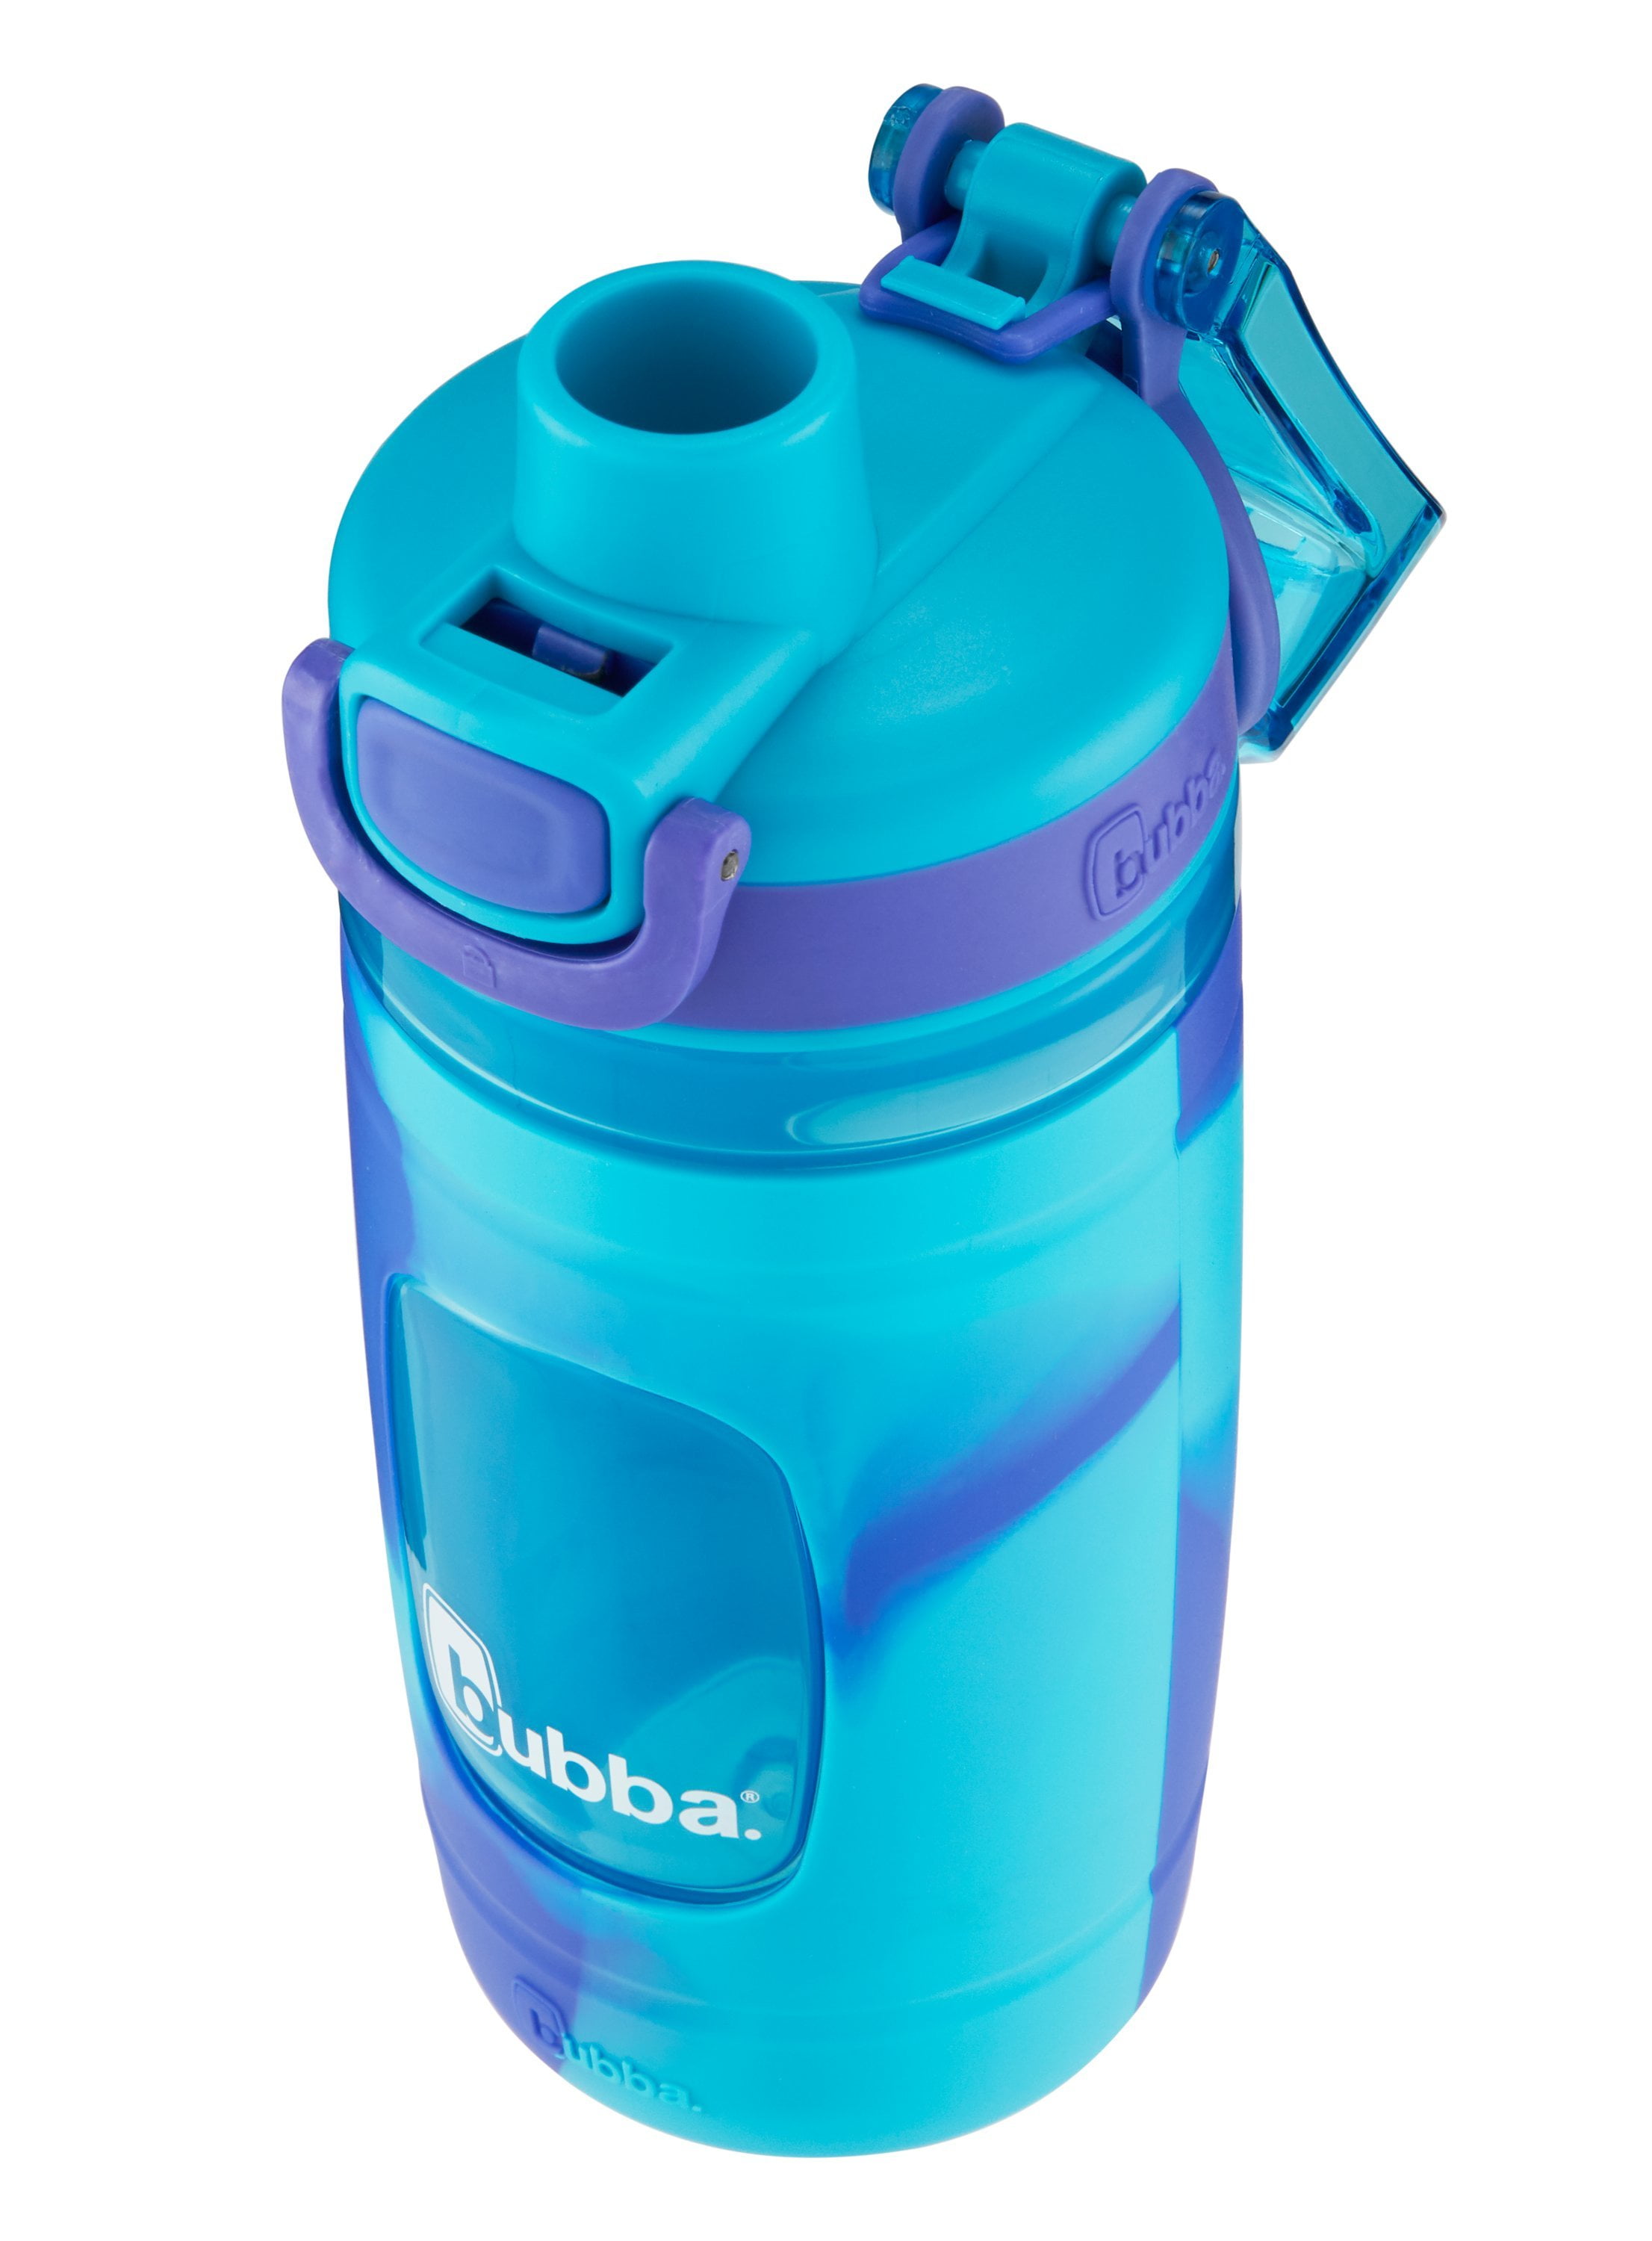 bubba Flo Kids Water Bottle on Sale For $5.00 (was $8.99)!! The Perfect  Leak-Proof Water Bottle! - Passion For Savings